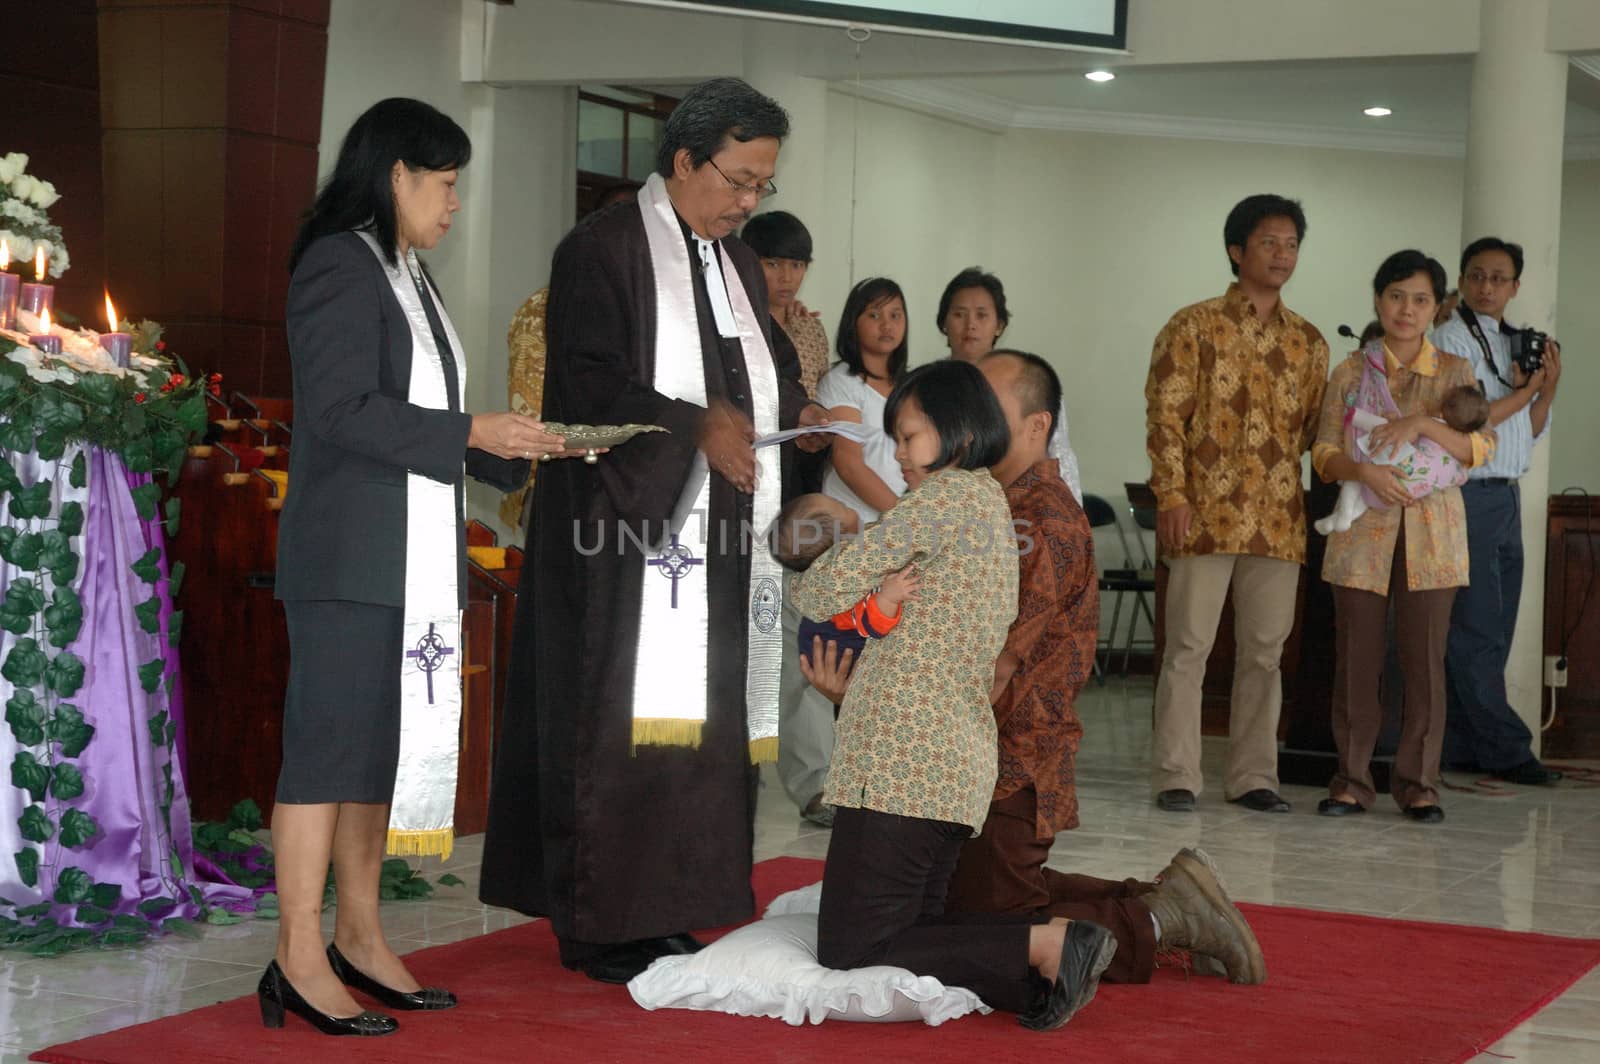 bandung, indonesia-december 19, 2010: Baptism - a christian rite of admission and almost invariably with the use of water, into the christian church generally and also a particular church tradition.